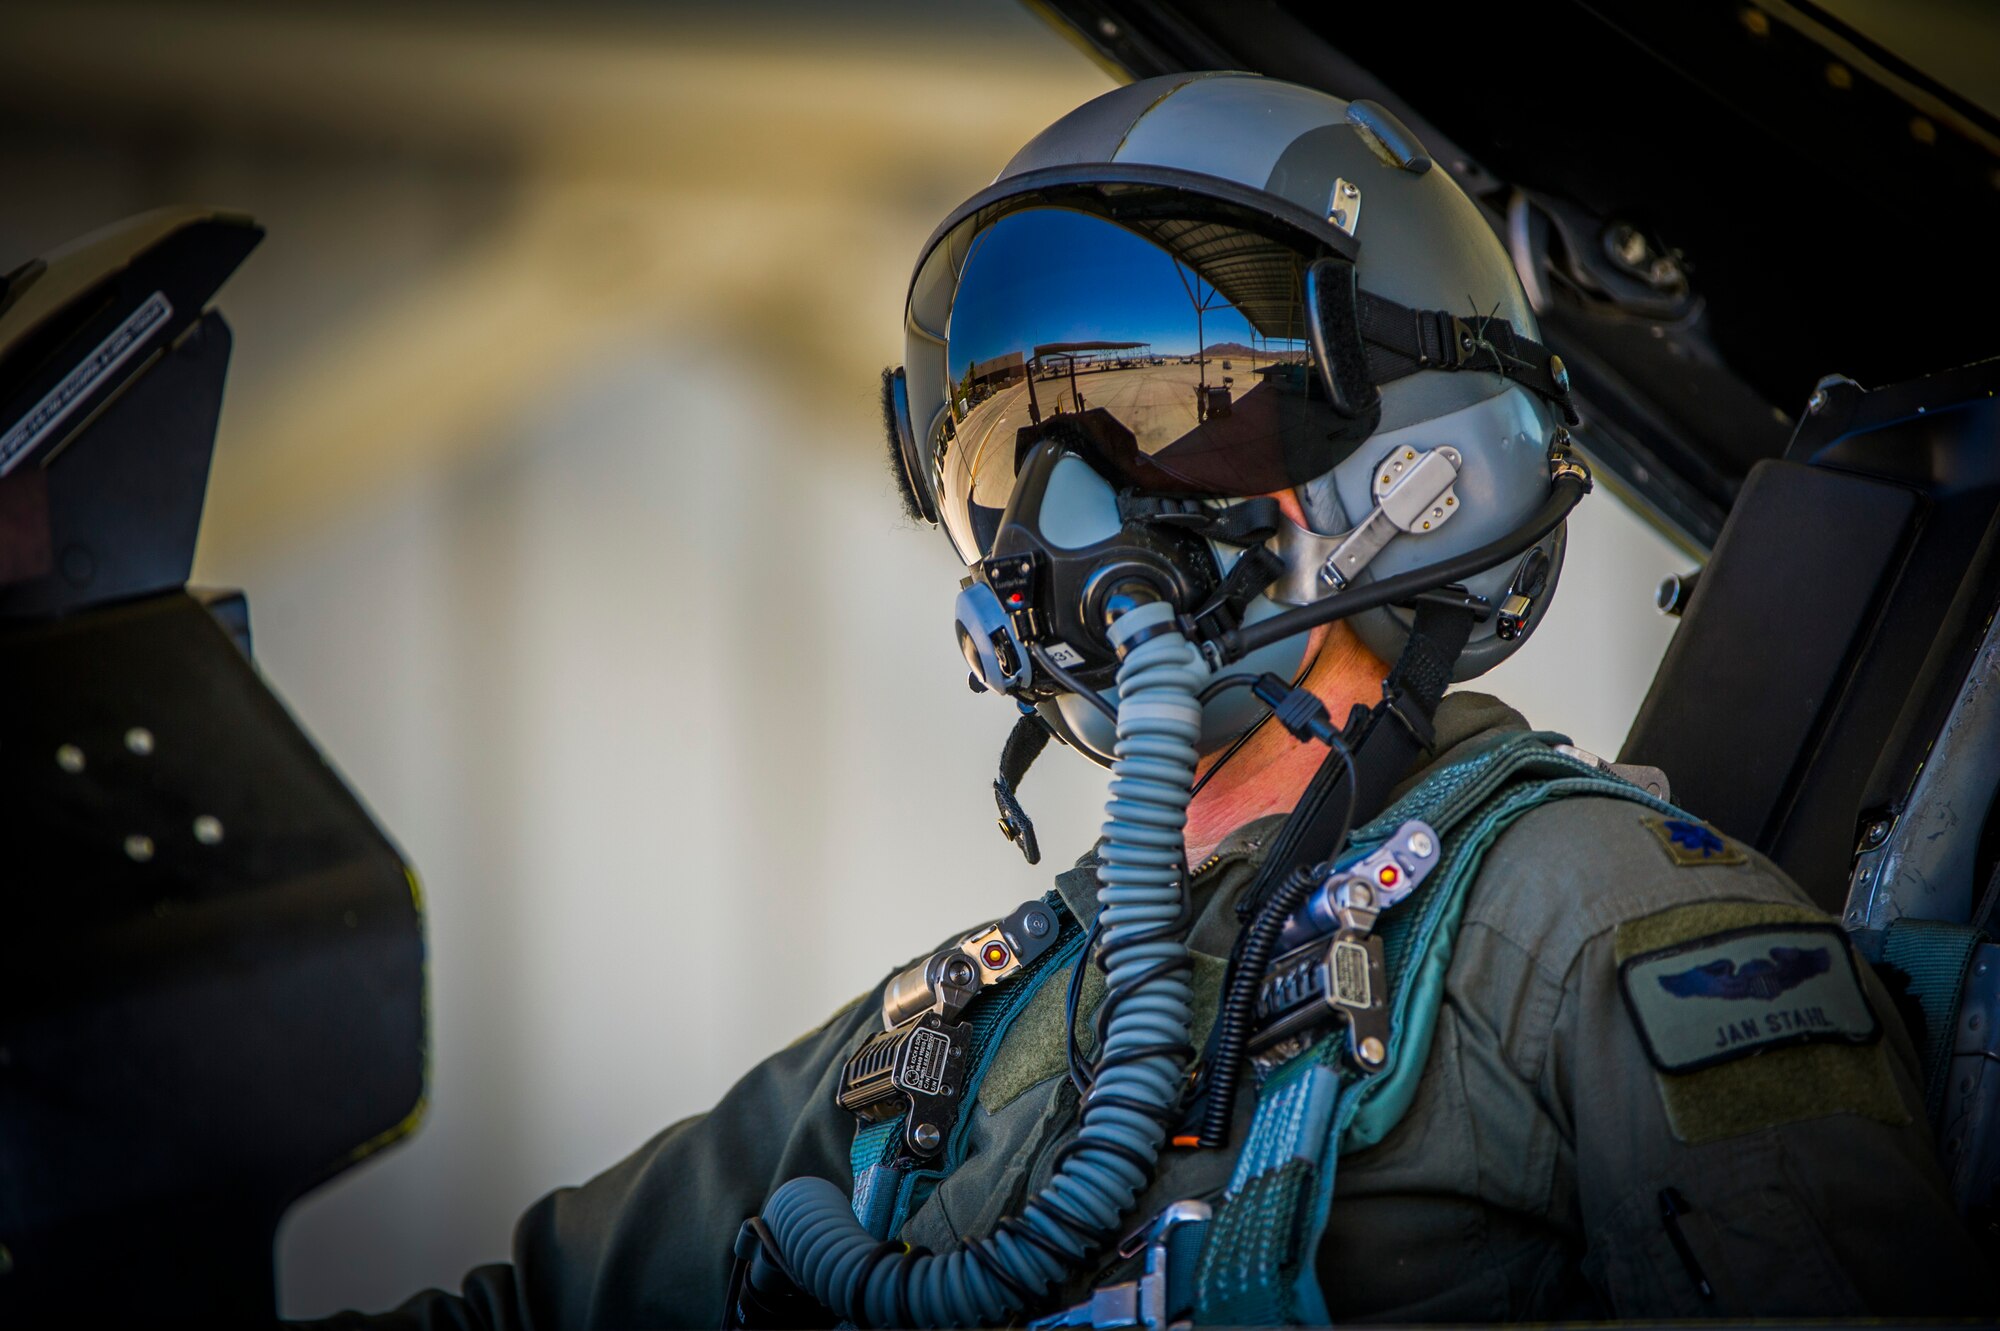 Lt. Col. Jan Stahl, 706th Fighter Squadron commander, conducts pre-flight checks inside an F-16 fighting falcon July 16, 2019, at Nellis Air Force Base, Nev. Red Flag focuses on the application of core missions to include Command and Control, Intelligence Surveillance, Strike and Personnel Recovery and how to work with Coalition counterparts to ensure success. The 706th Fighter Squadron oversees Air Force Reserve Command members assigned to the U.S. Air Force Warfare Center, supporting missions in its 57th Wing, 53rd Wing and 505th Command and Control Wing. Pilots assigned to the 706 FS fly an array of aircraft to include the F-15C, F-15E, F-16, F-22 and F-35 aircraft. To prepare combat air forces, joint and allied crews with realistic training, pilots in the 706 FS operate with the 64th Aggressor Squadron to facilitate operational threat replication, training, and feedback. The Red Flag exercise will continue through July 26, 2019.